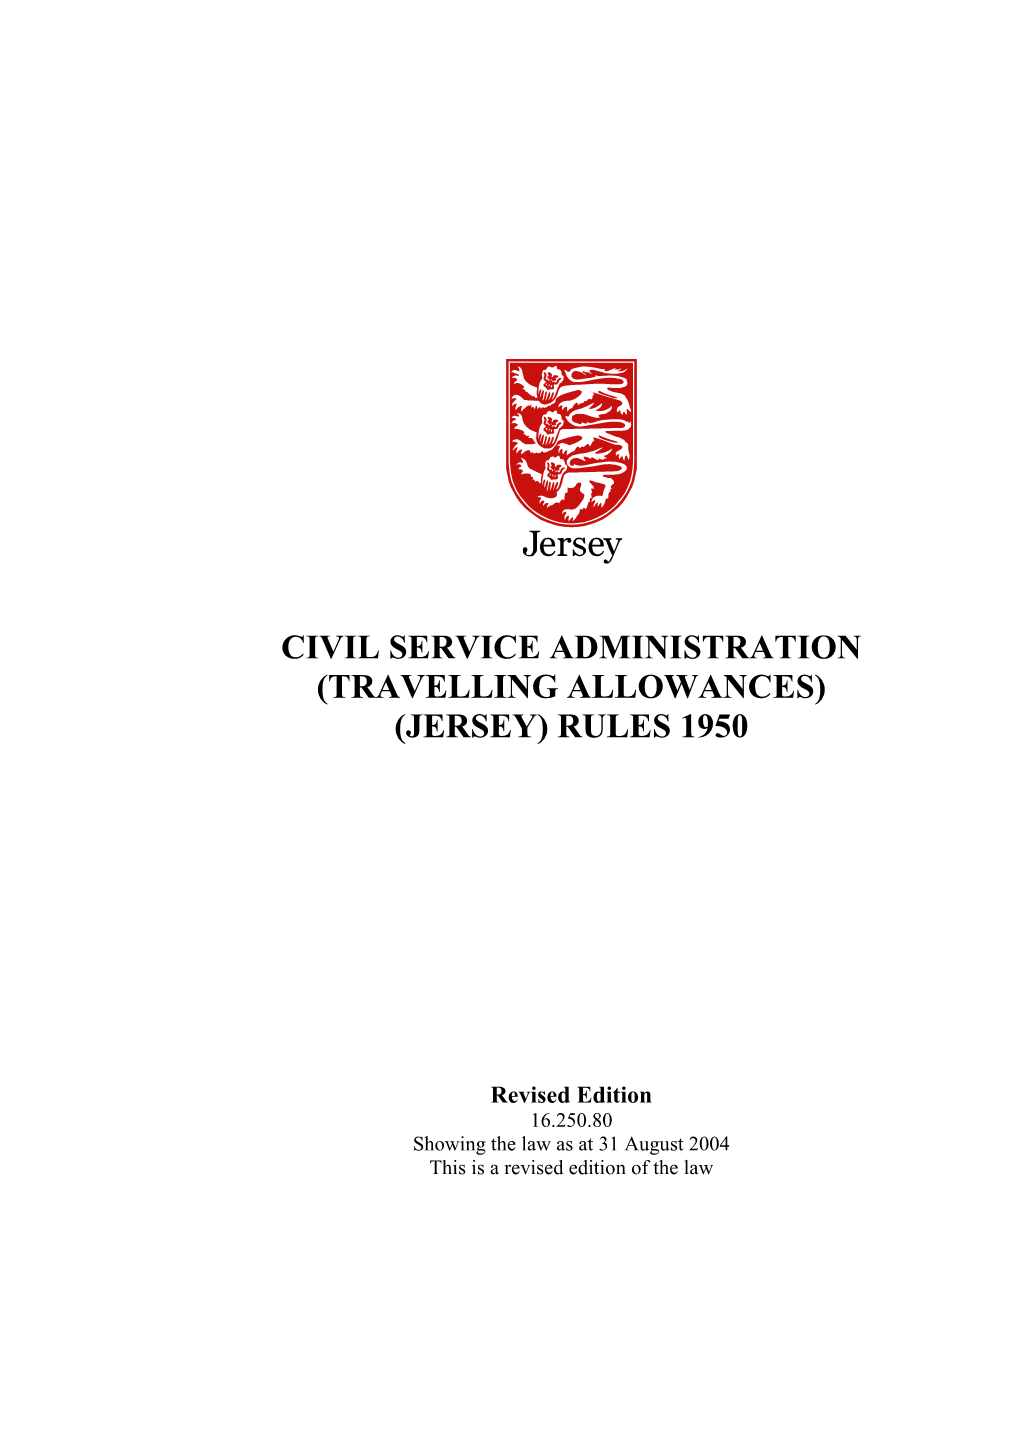 (Travelling Allowances) (Jersey) Rules 1950